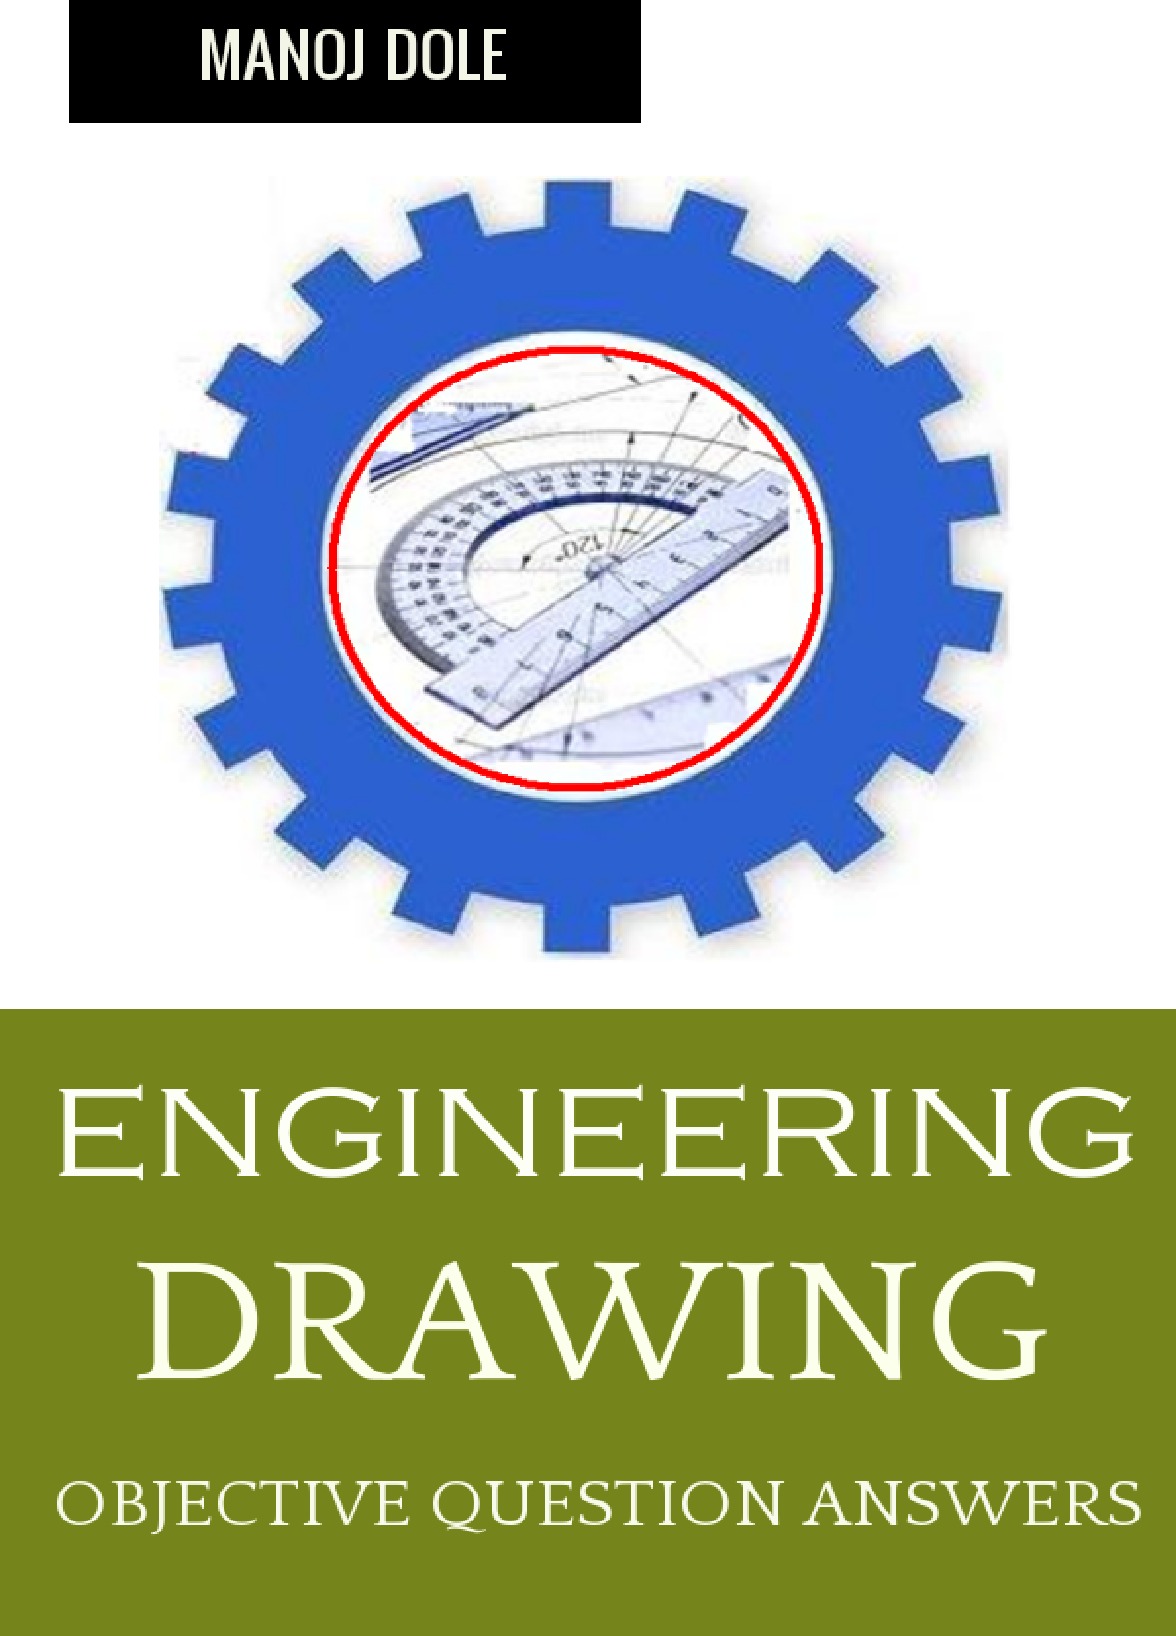 Assembly and Details machine drawing pdf | Mechanical design, Mechanical  engineering design, Engineering design